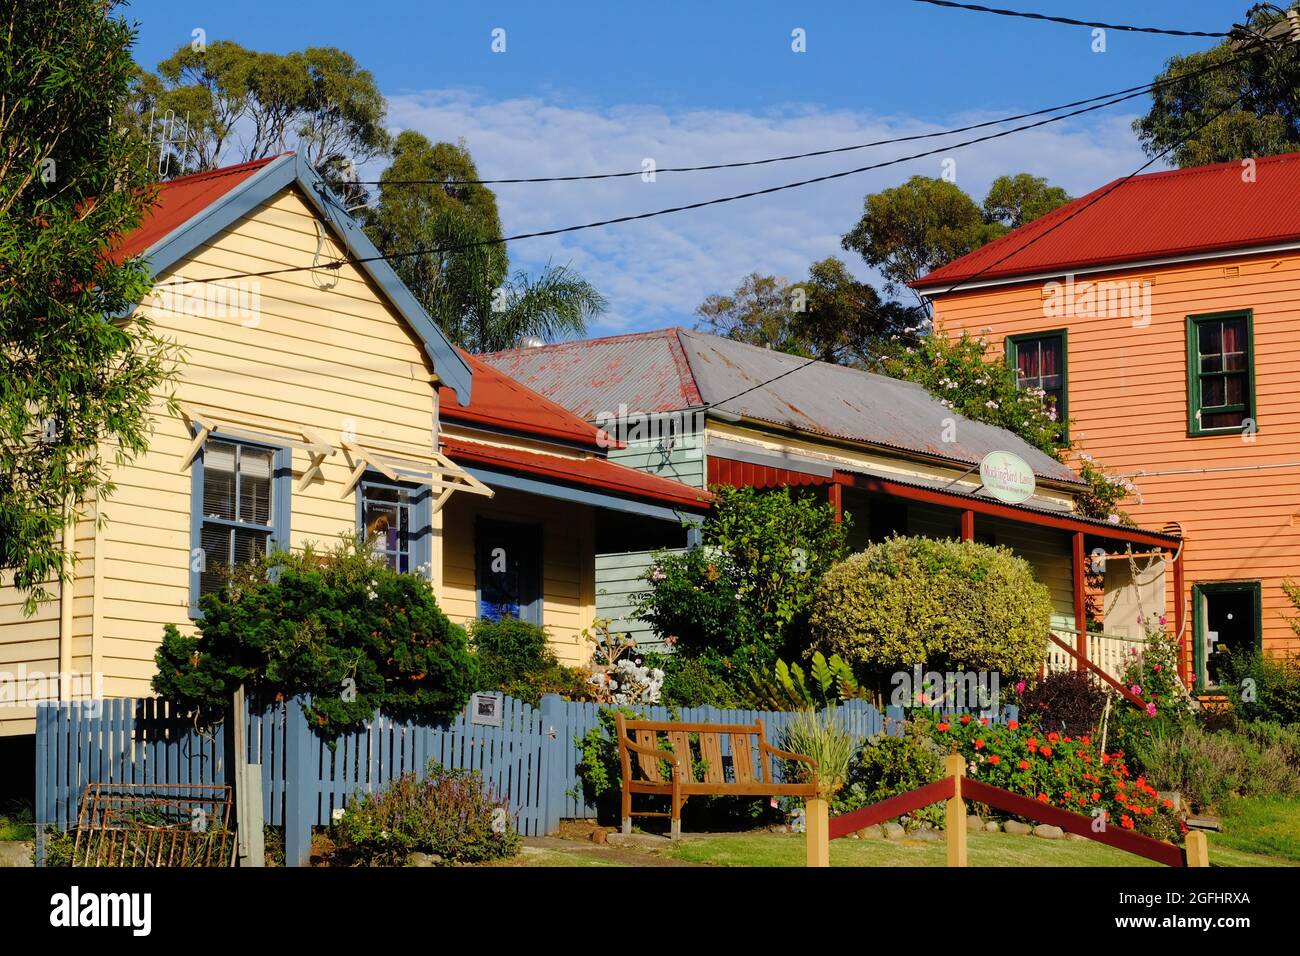 Traditional weatherboard and corrugated iron buildings at Tilba, New South Wales, Australia Stock Photo